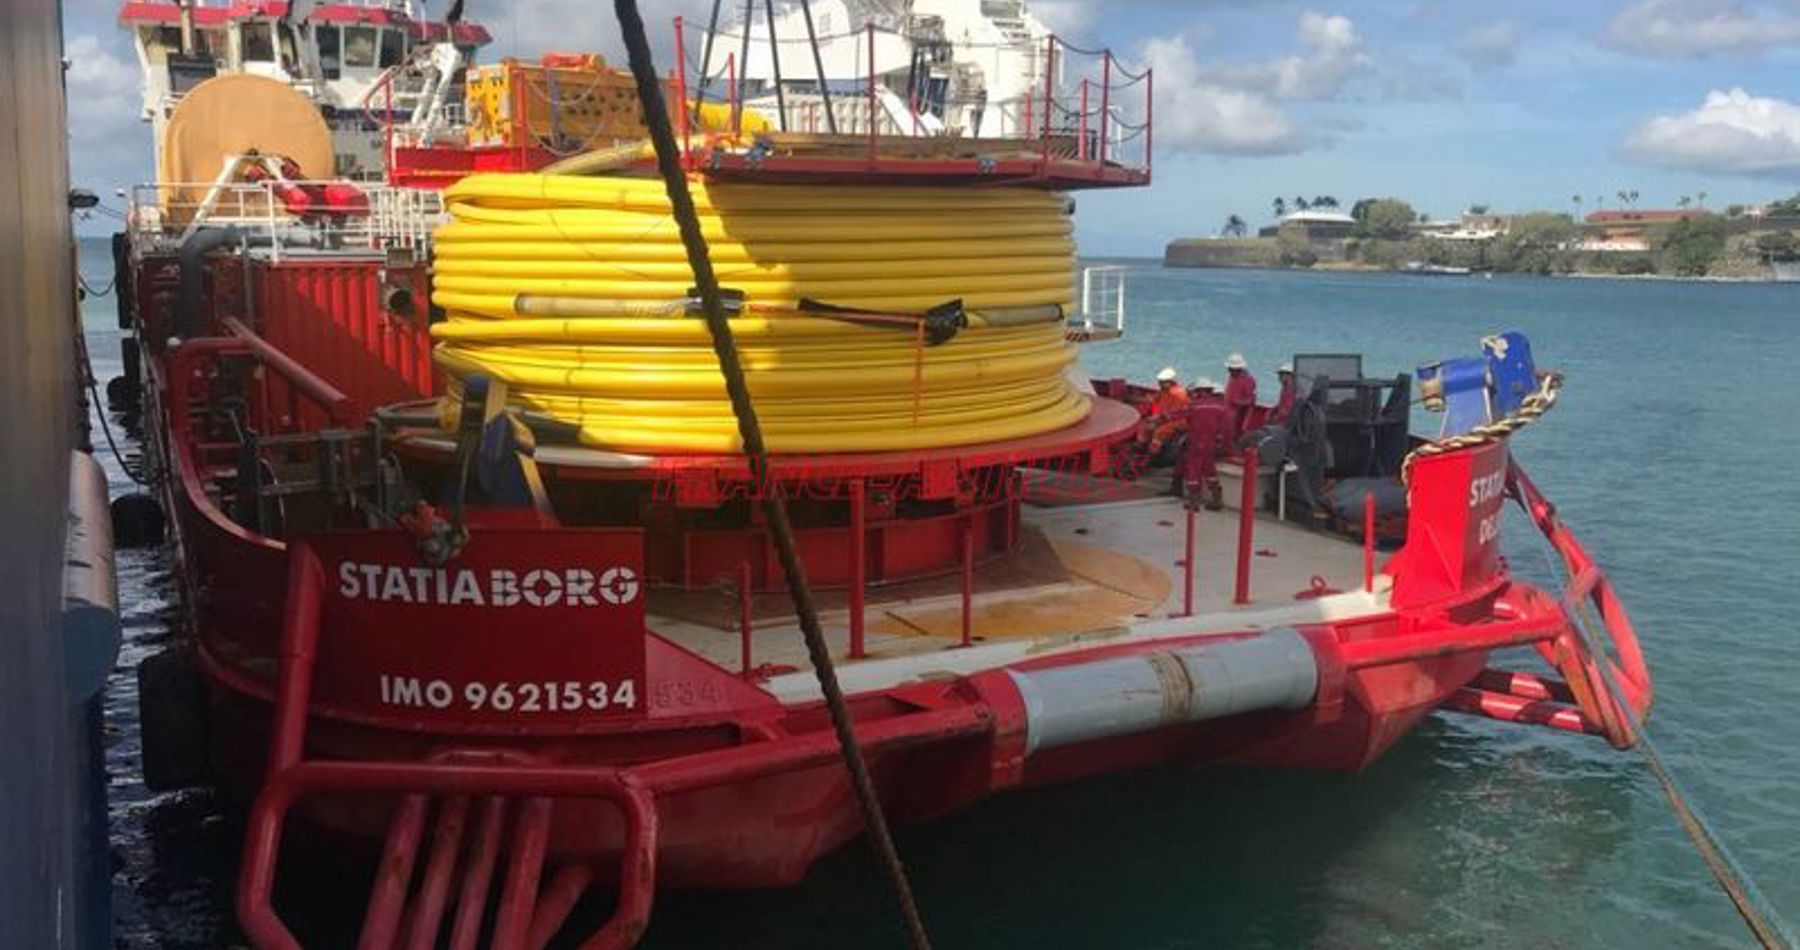 Cable laying equipment on Statiaborg